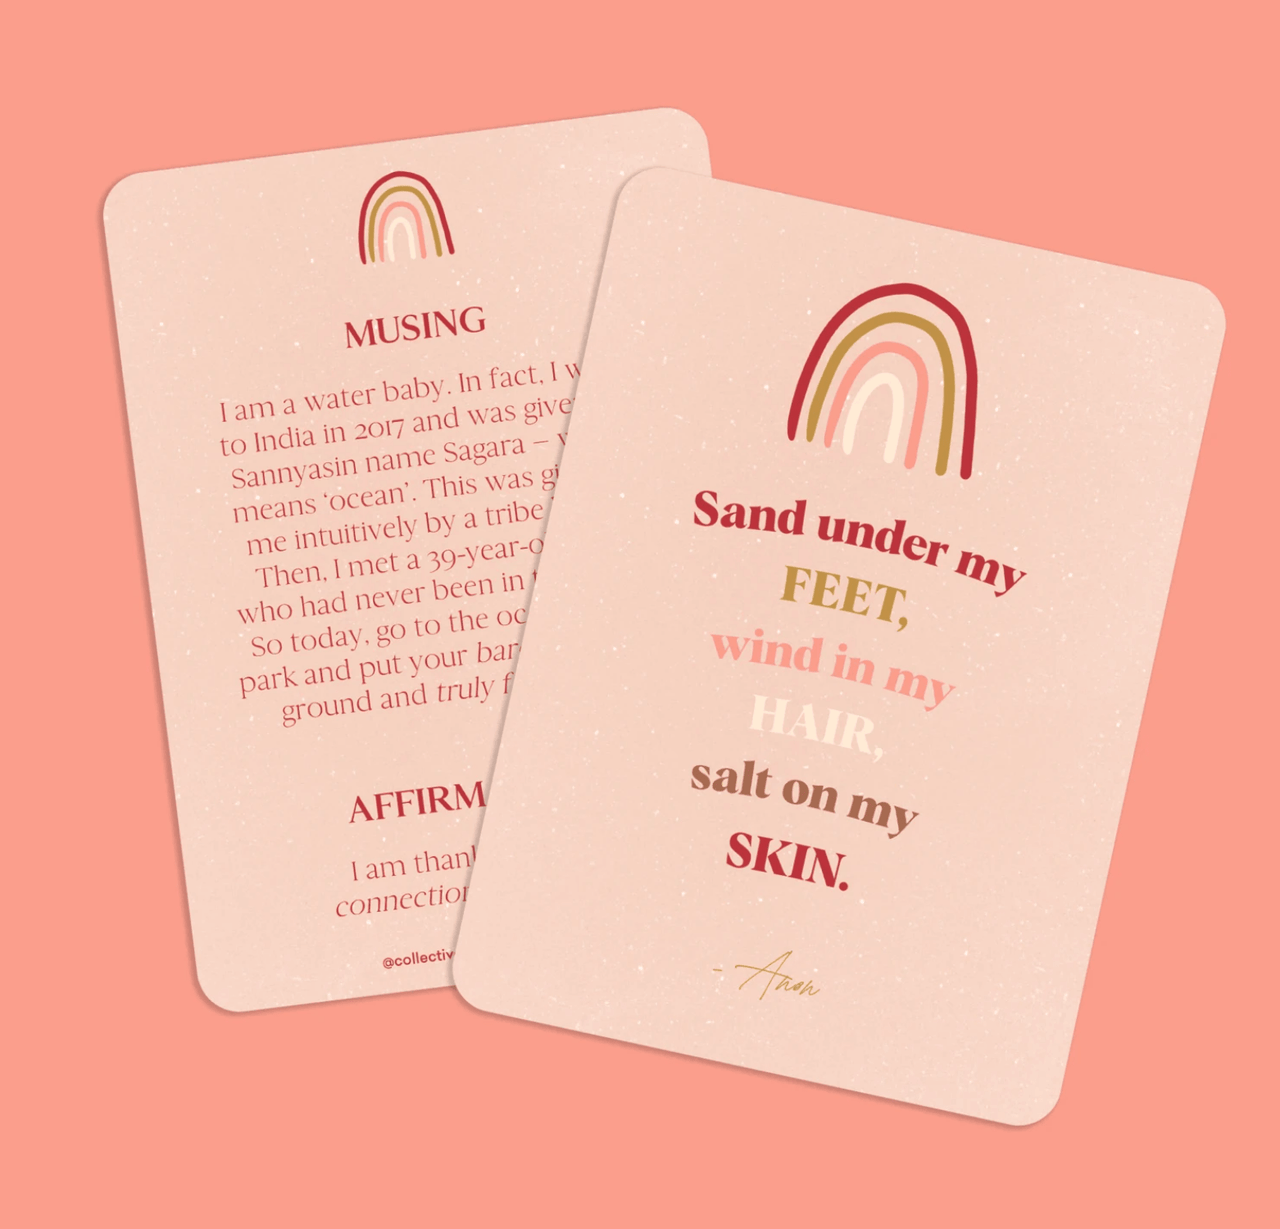 A Collective Hub pink card with the words "sand under my feet, wind my hair, salt on my skin" from the Affirmations to Guide Your Journey - Box Card Set.